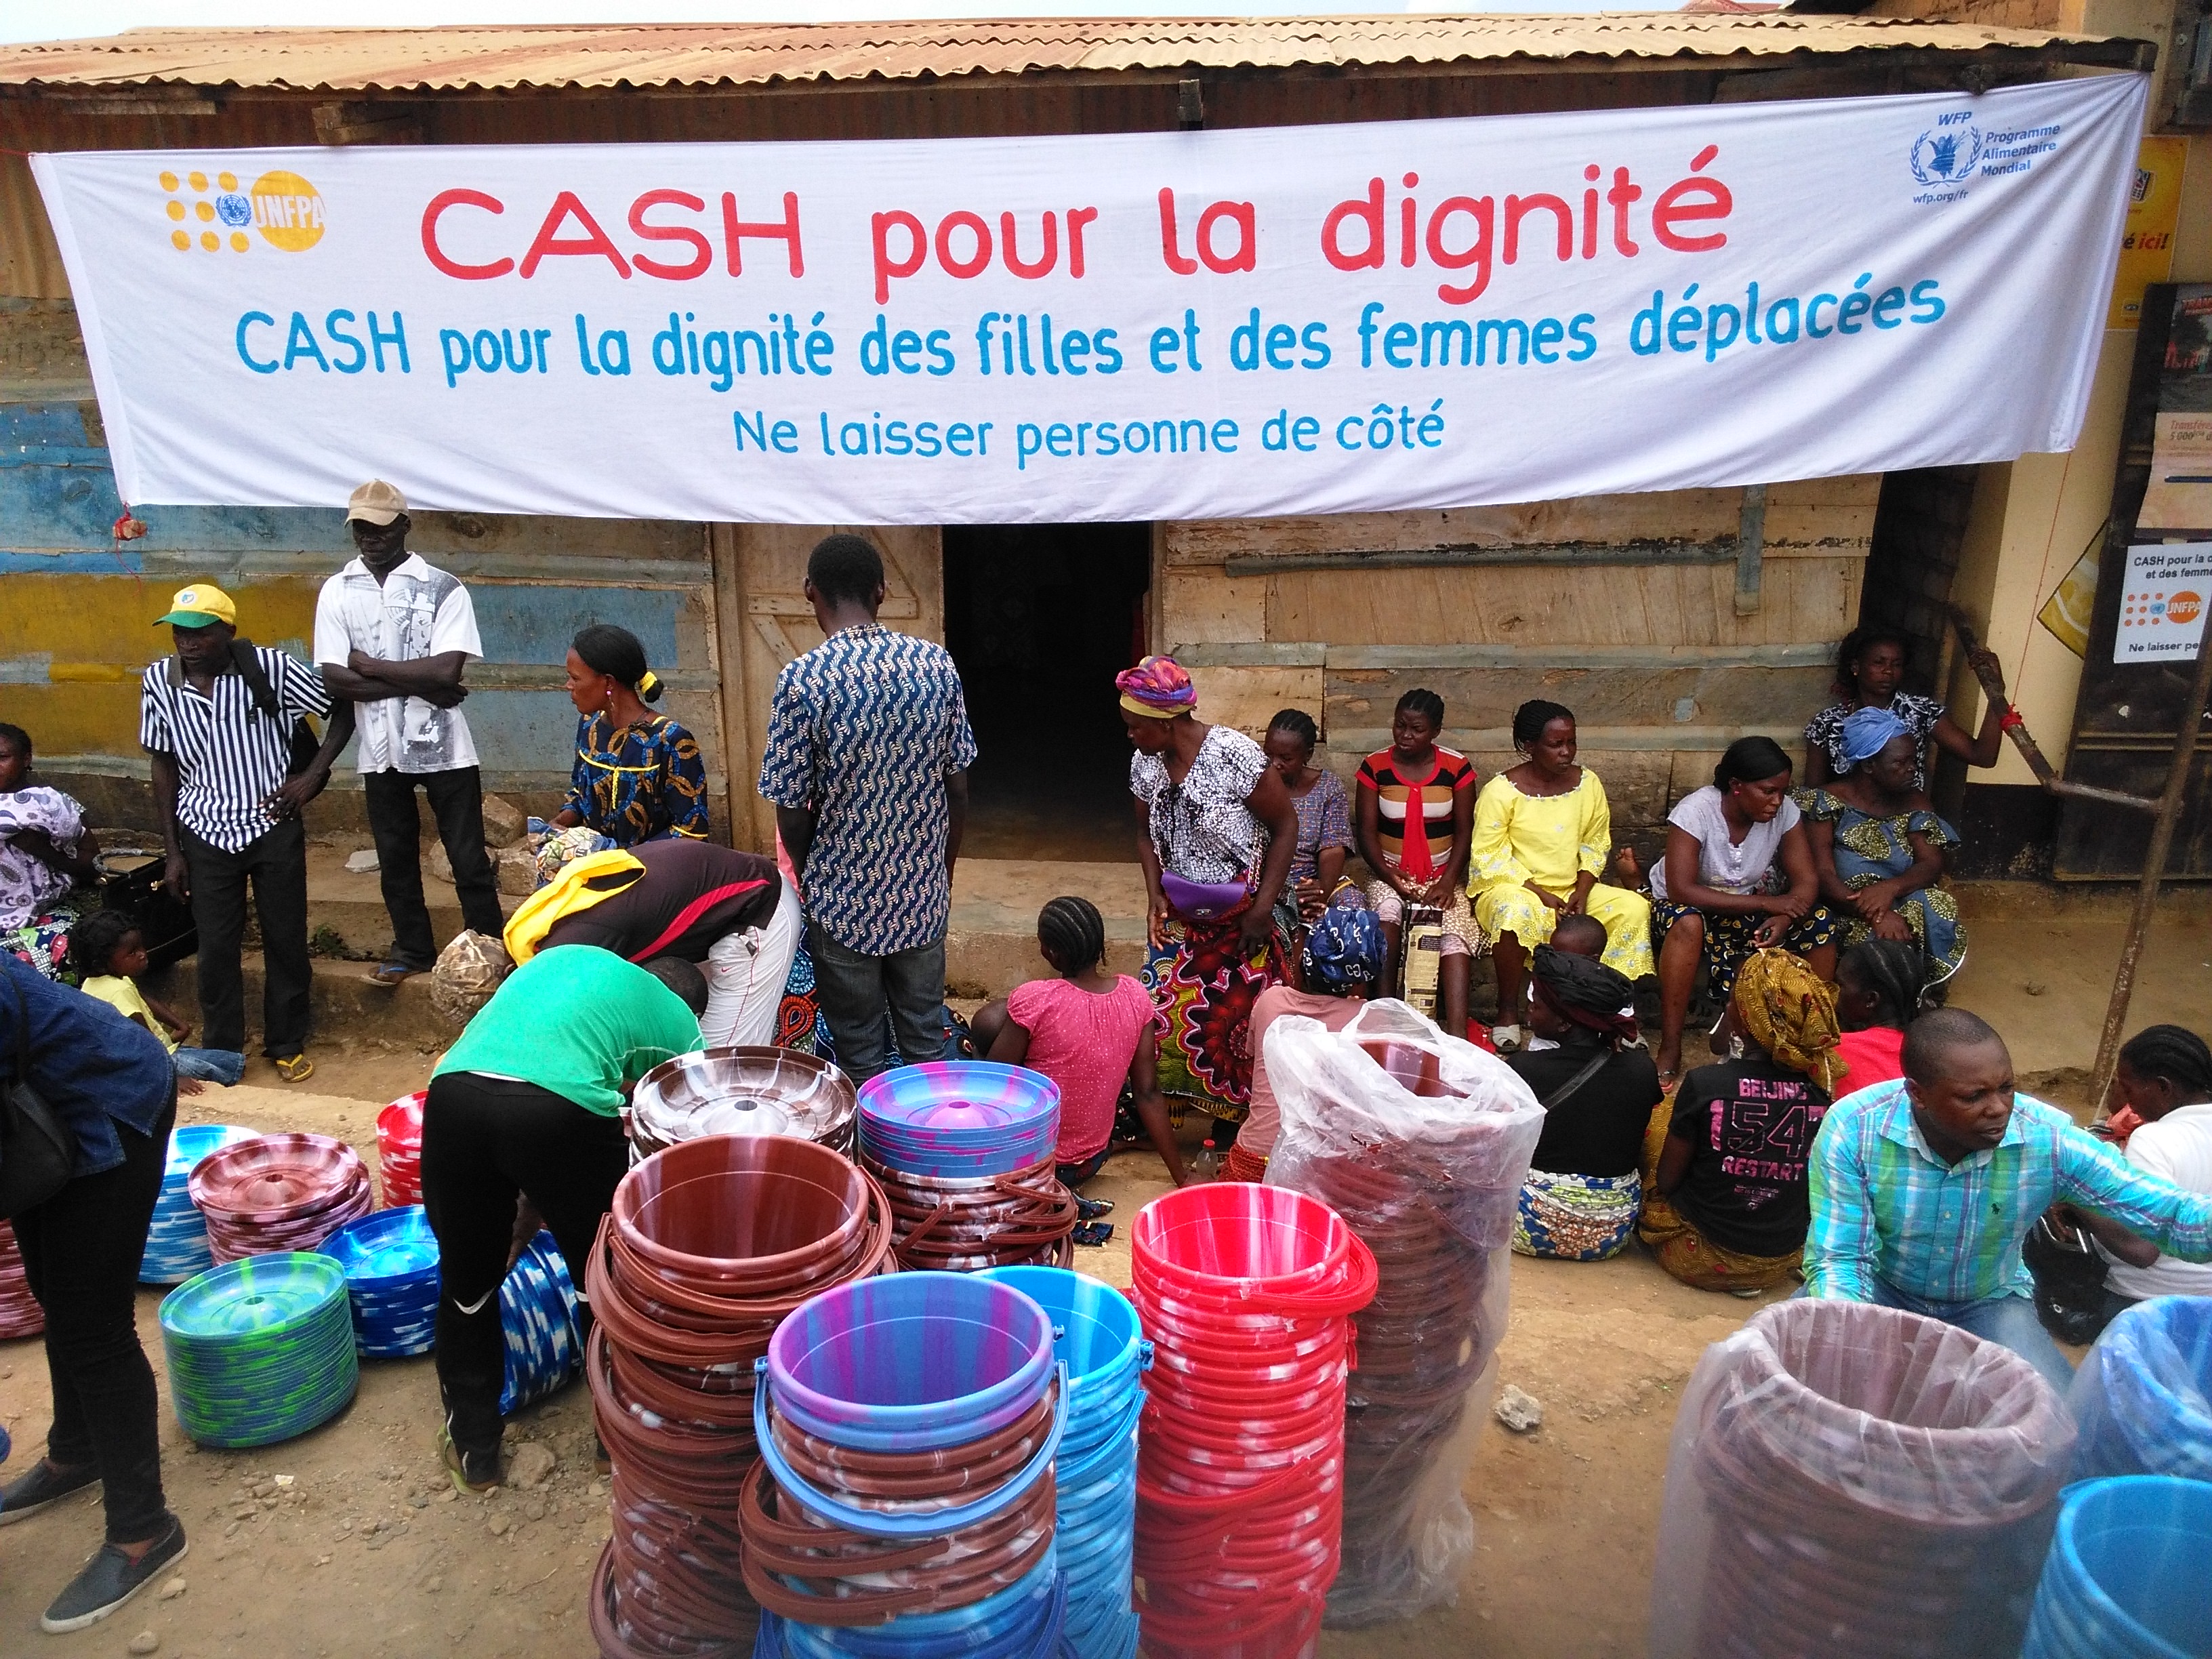 2,500 dignity kits distributed to displaced women and girls in Congo